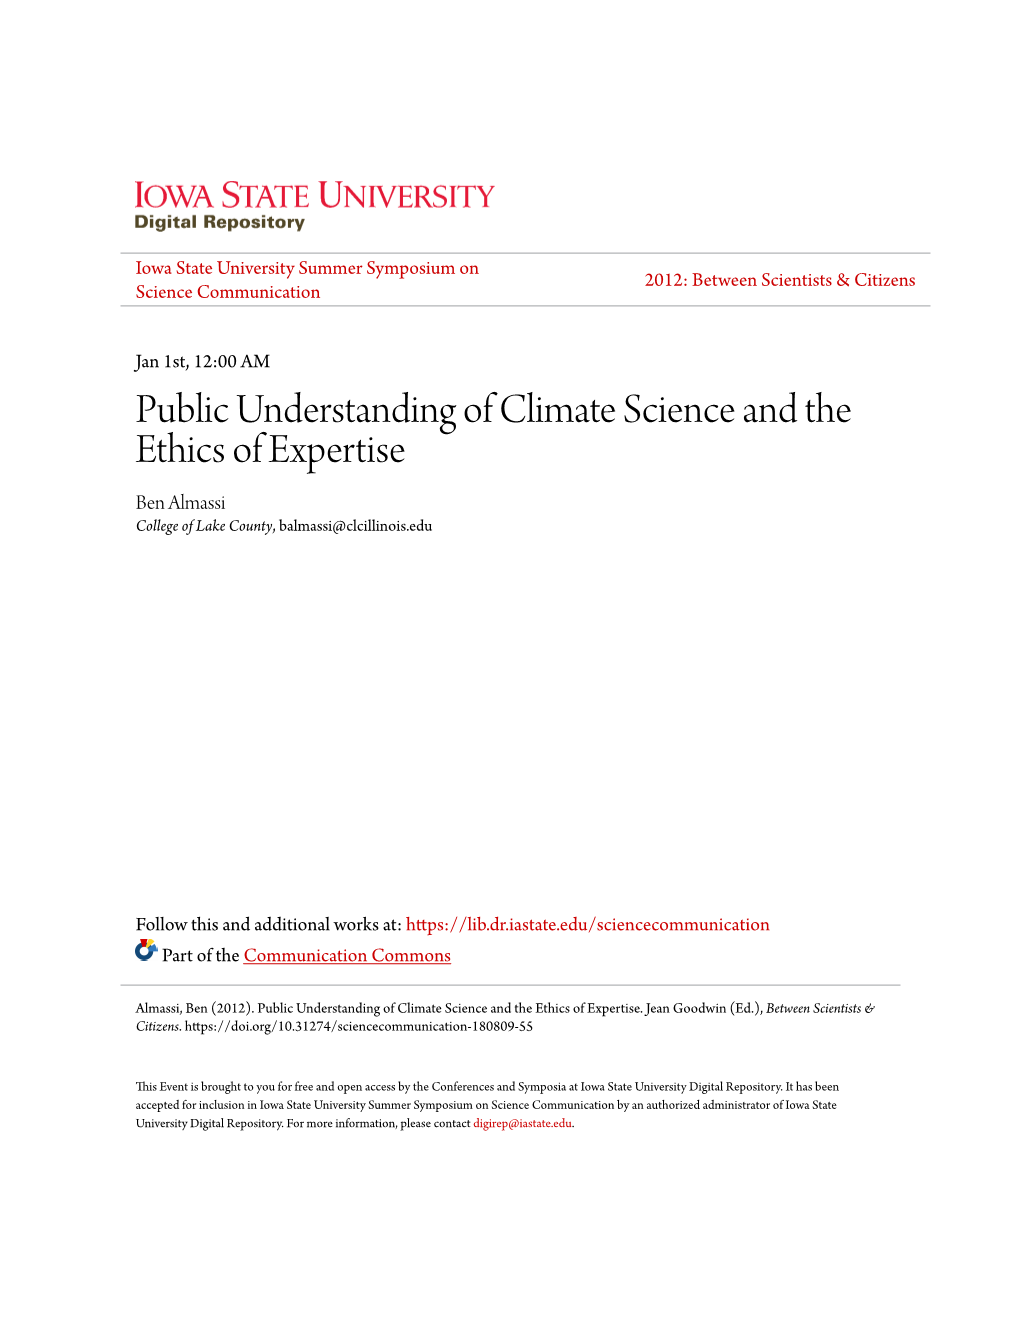 Public Understanding of Climate Science and the Ethics of Expertise Ben Almassi College of Lake County, Balmassi@Clcillinois.Edu